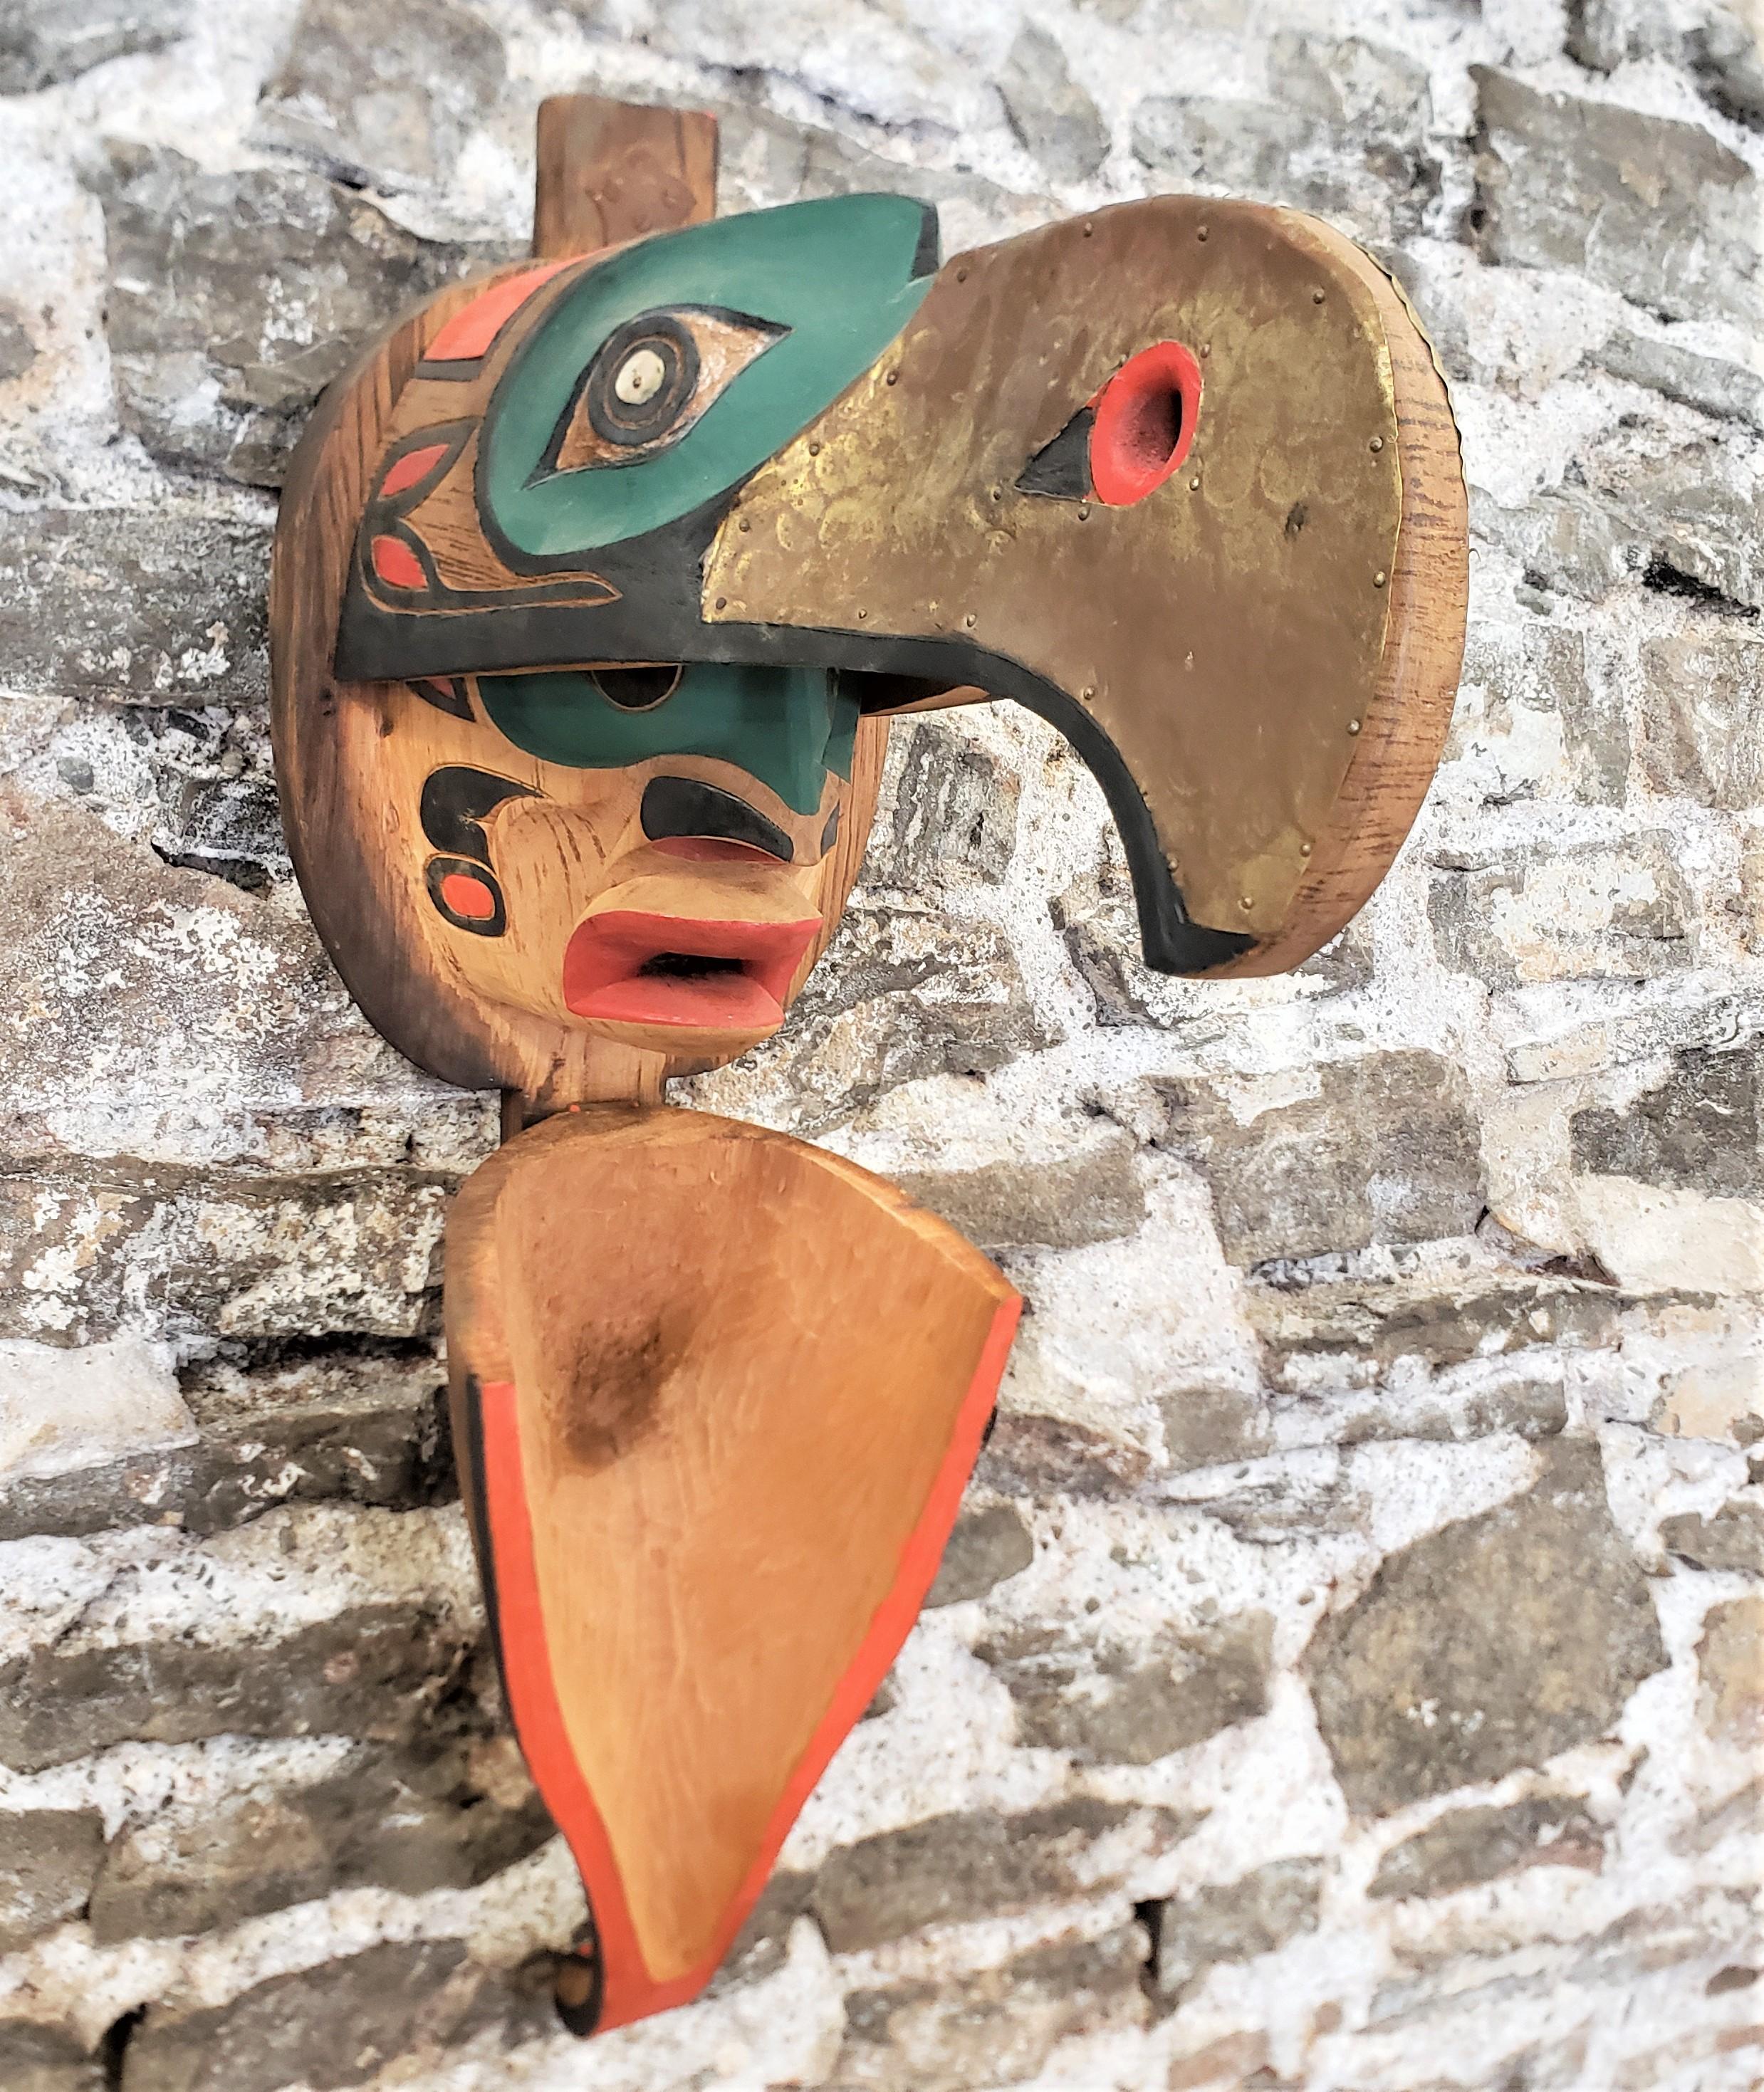 Canadian Large West Coast Haida Styled Indigenous Folk Art Carved Mask or Wall Sculpture